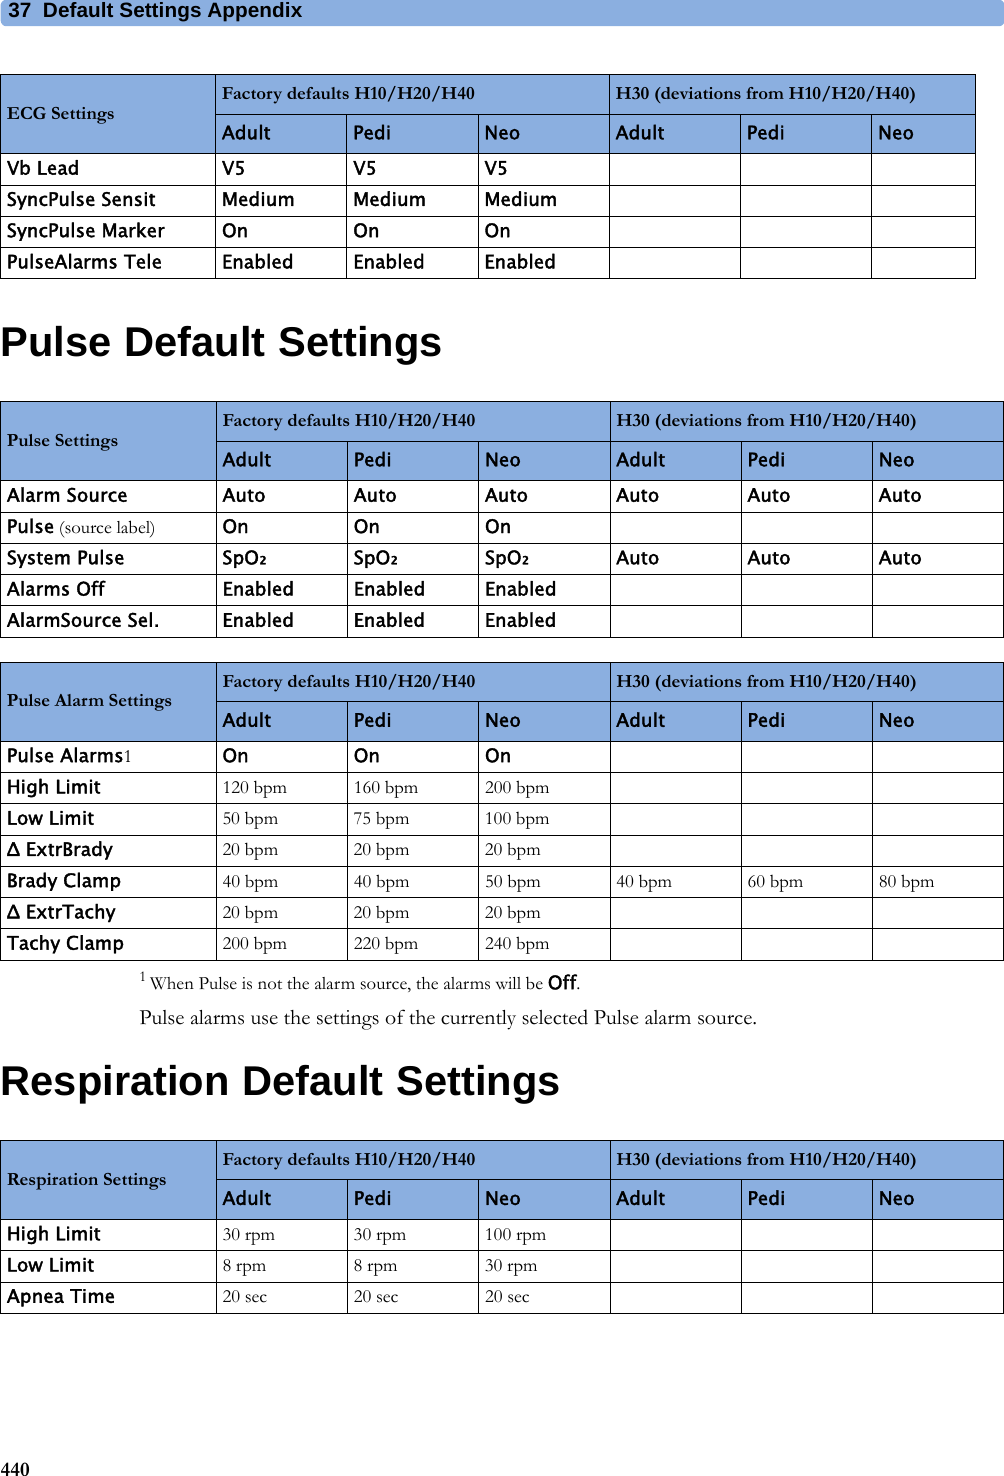 37 Default Settings Appendix440Pulse Default Settings1 When Pulse is not the alarm source, the alarms will be Off.Pulse alarms use the settings of the currently selected Pulse alarm source.Respiration Default SettingsVb Lead V5 V5 V5SyncPulse Sensit Medium Medium MediumSyncPulse Marker On On OnPulseAlarms Tele Enabled Enabled EnabledECG SettingsFactory defaults H10/H20/H40 H30 (deviations from H10/H20/H40)Adult Pedi Neo Adult Pedi NeoPulse SettingsFactory defaults H10/H20/H40 H30 (deviations from H10/H20/H40)Adult Pedi Neo Adult Pedi NeoAlarm Source Auto Auto Auto Auto Auto AutoPulse (source label) On On OnSystem Pulse SpO₂SpO₂SpO₂Auto Auto AutoAlarms Off Enabled Enabled EnabledAlarmSource Sel. Enabled Enabled EnabledPulse Alarm SettingsFactory defaults H10/H20/H40 H30 (deviations from H10/H20/H40)Adult Pedi Neo Adult Pedi NeoPulse Alarms1On On OnHigh Limit 120 bpm 160 bpm 200 bpmLow Limit 50 bpm 75 bpm 100 bpmΔ ExtrBrady 20 bpm 20 bpm 20 bpmBrady Clamp 40 bpm40 bpm50 bpm40 bpm60 bpm80 bpmΔ ExtrTachy 20 bpm 20 bpm 20 bpmTachy Clamp 200 bpm 220 bpm 240 bpmRespiration SettingsFactory defaults H10/H20/H40 H30 (deviations from H10/H20/H40)Adult Pedi Neo Adult Pedi NeoHigh Limit 30 rpm 30 rpm 100 rpmLow Limit 8 rpm 8 rpm 30 rpmApnea Time 20 sec 20 sec 20 sec